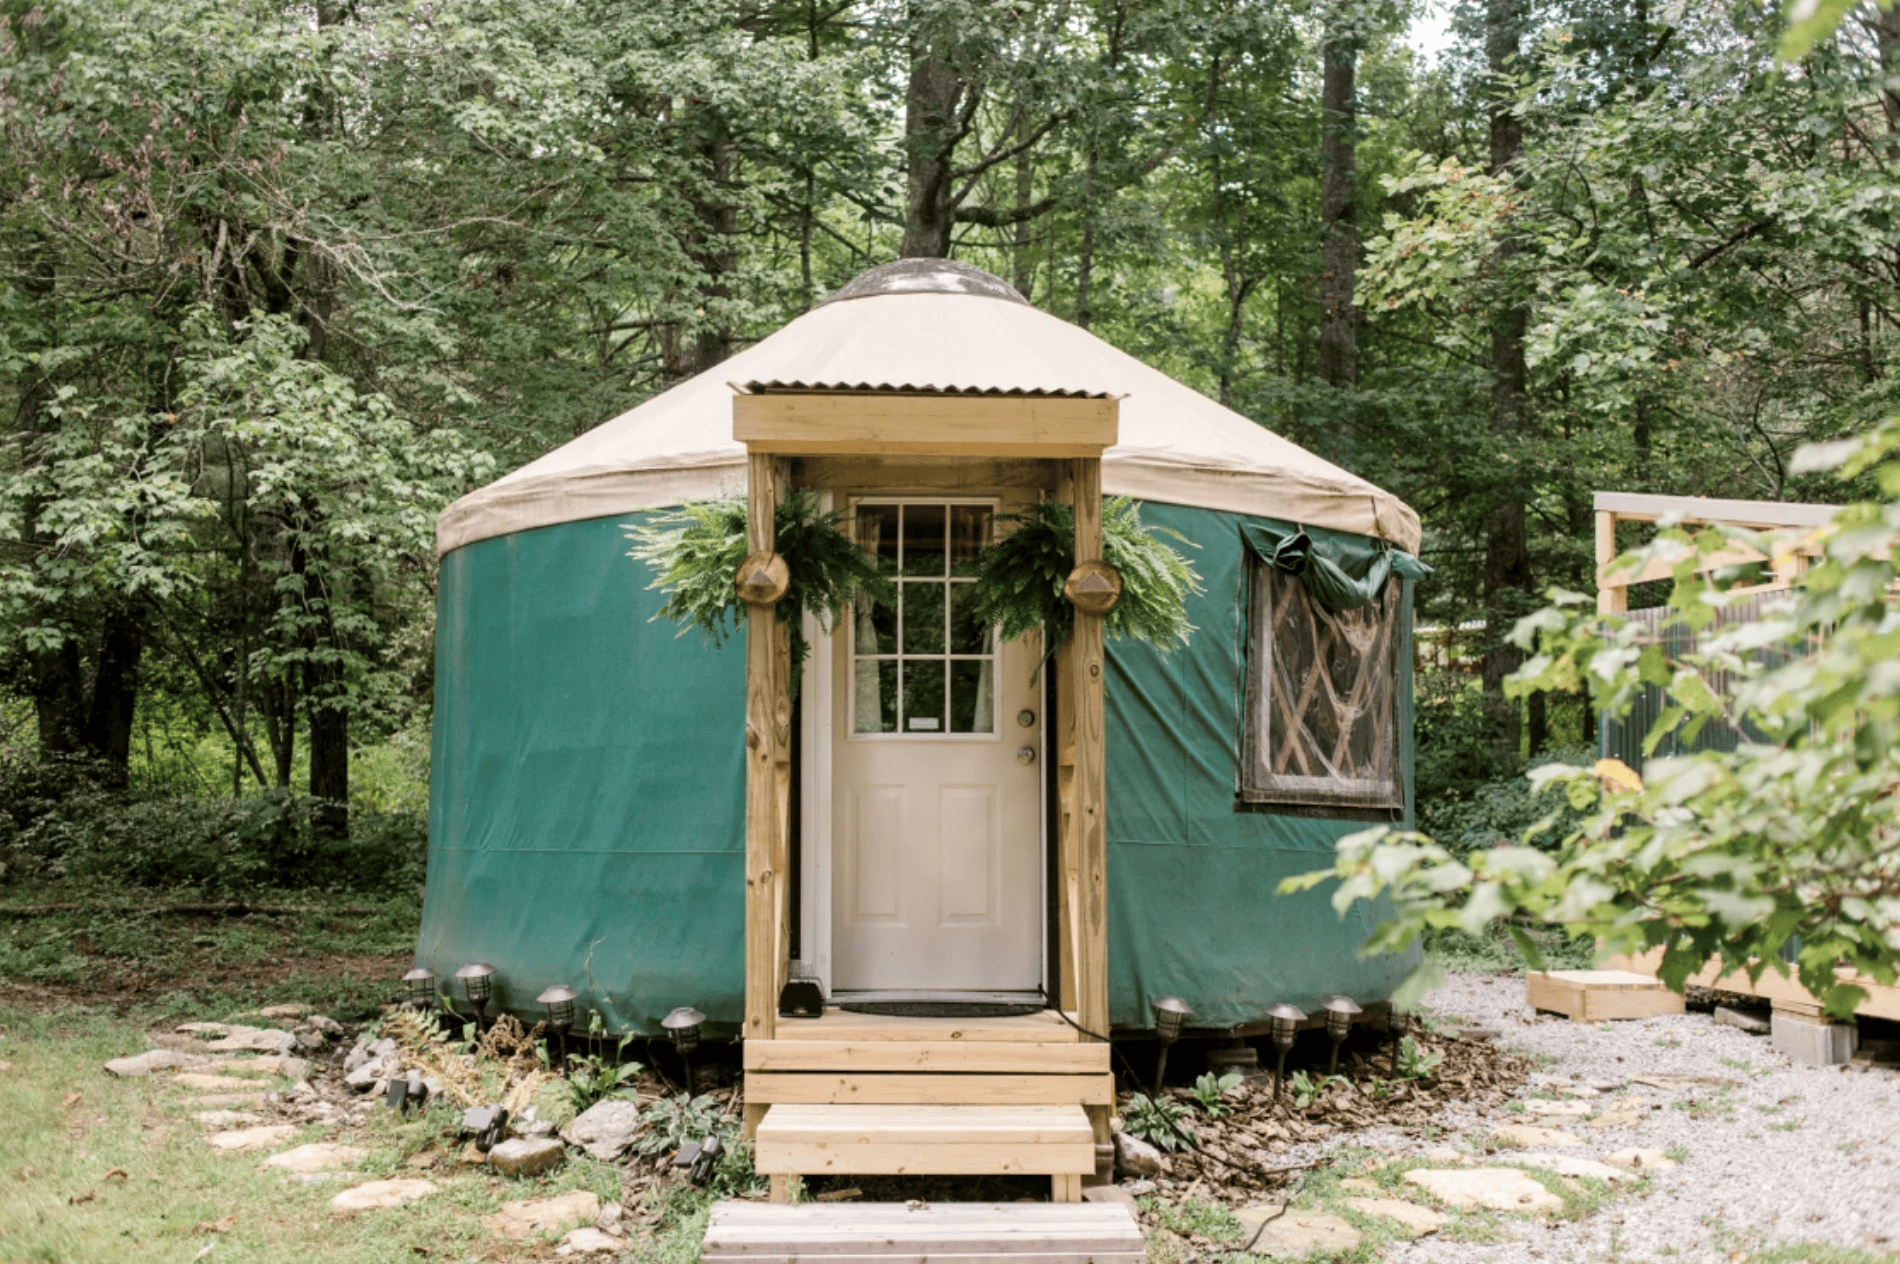 A little green yurt in the woods